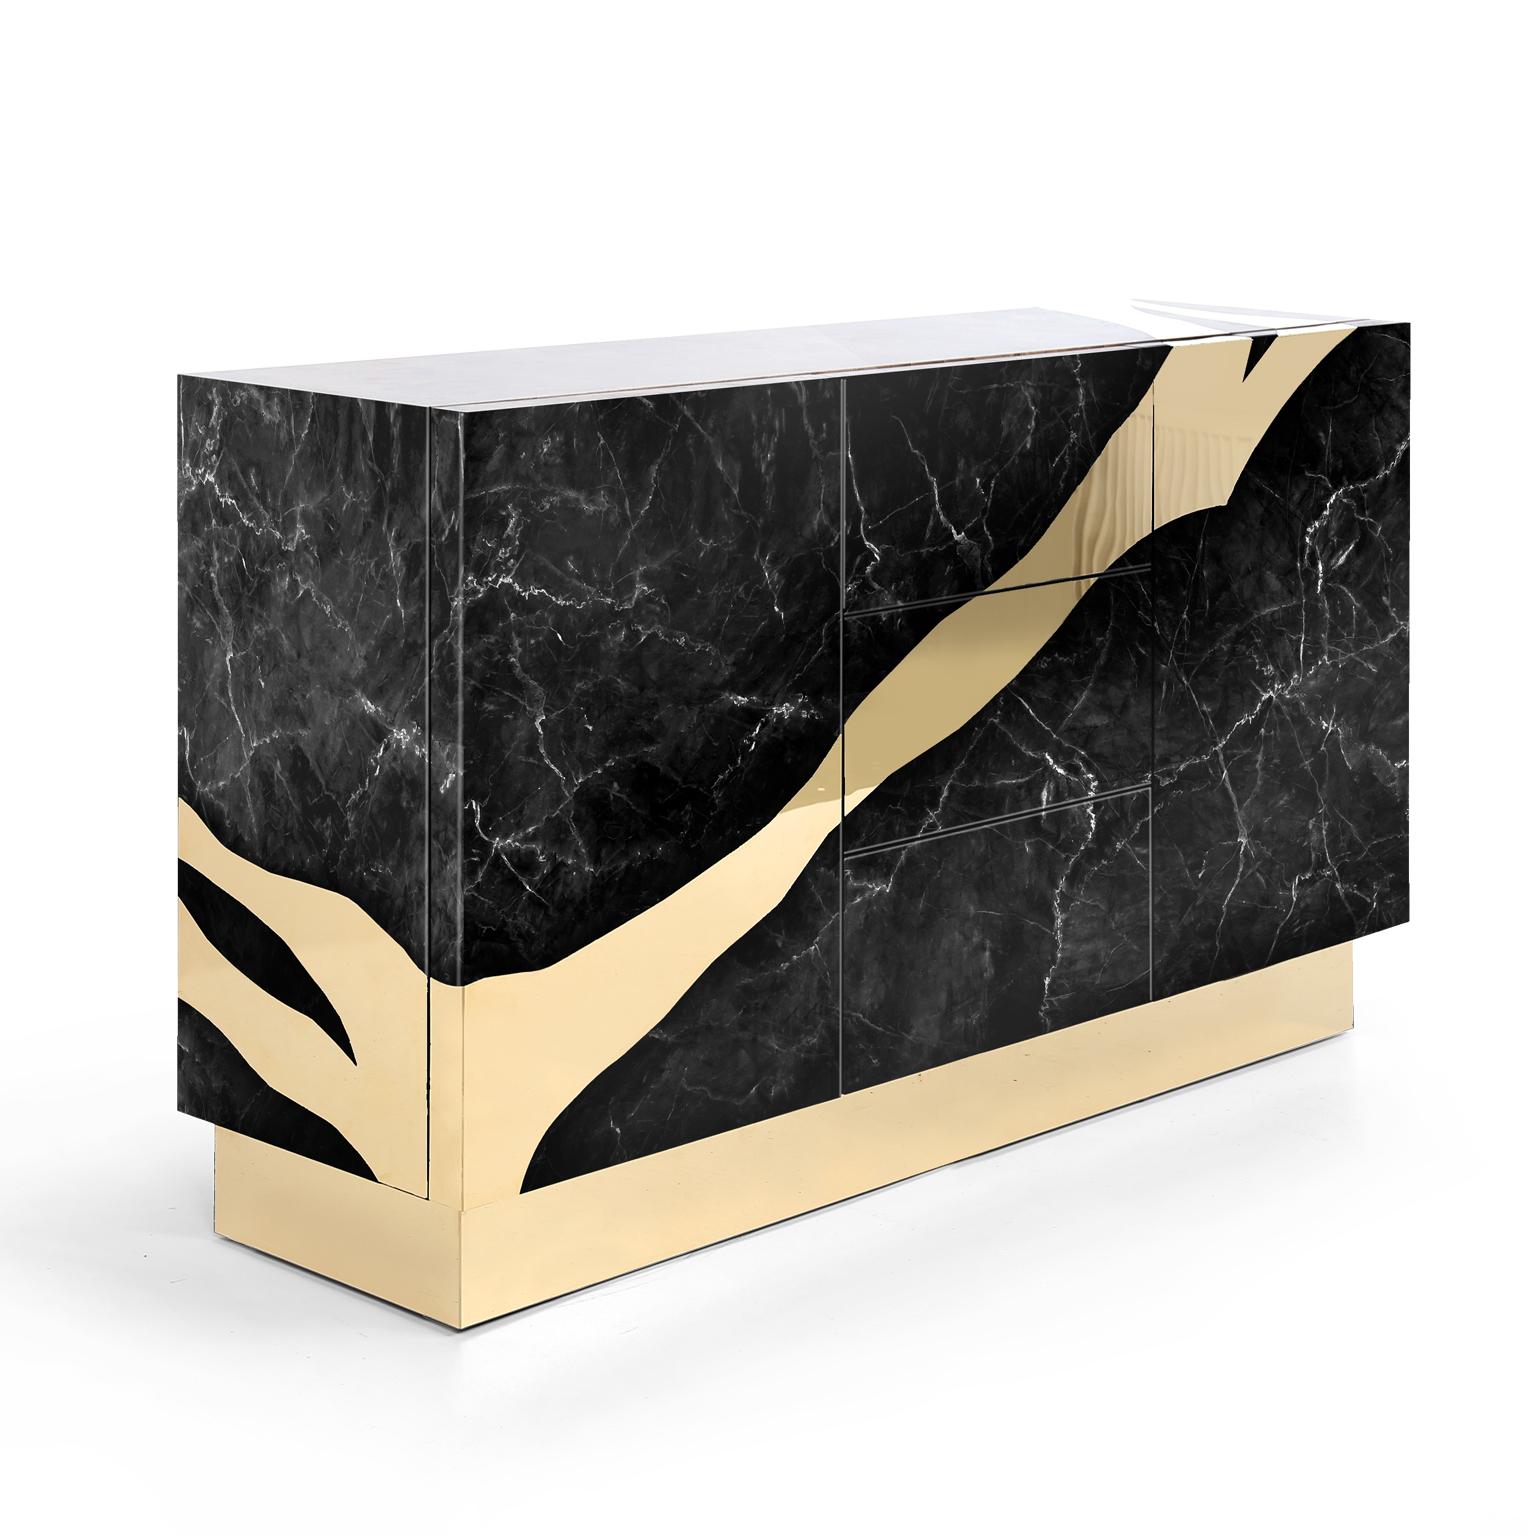 The Exclusive Marble Designer Sideboard is striking, a true statement of bold and elegant design. Current exquisite clean lines, the ultimate in contemporary style for those that have a love of design and the understated simplicity in fine